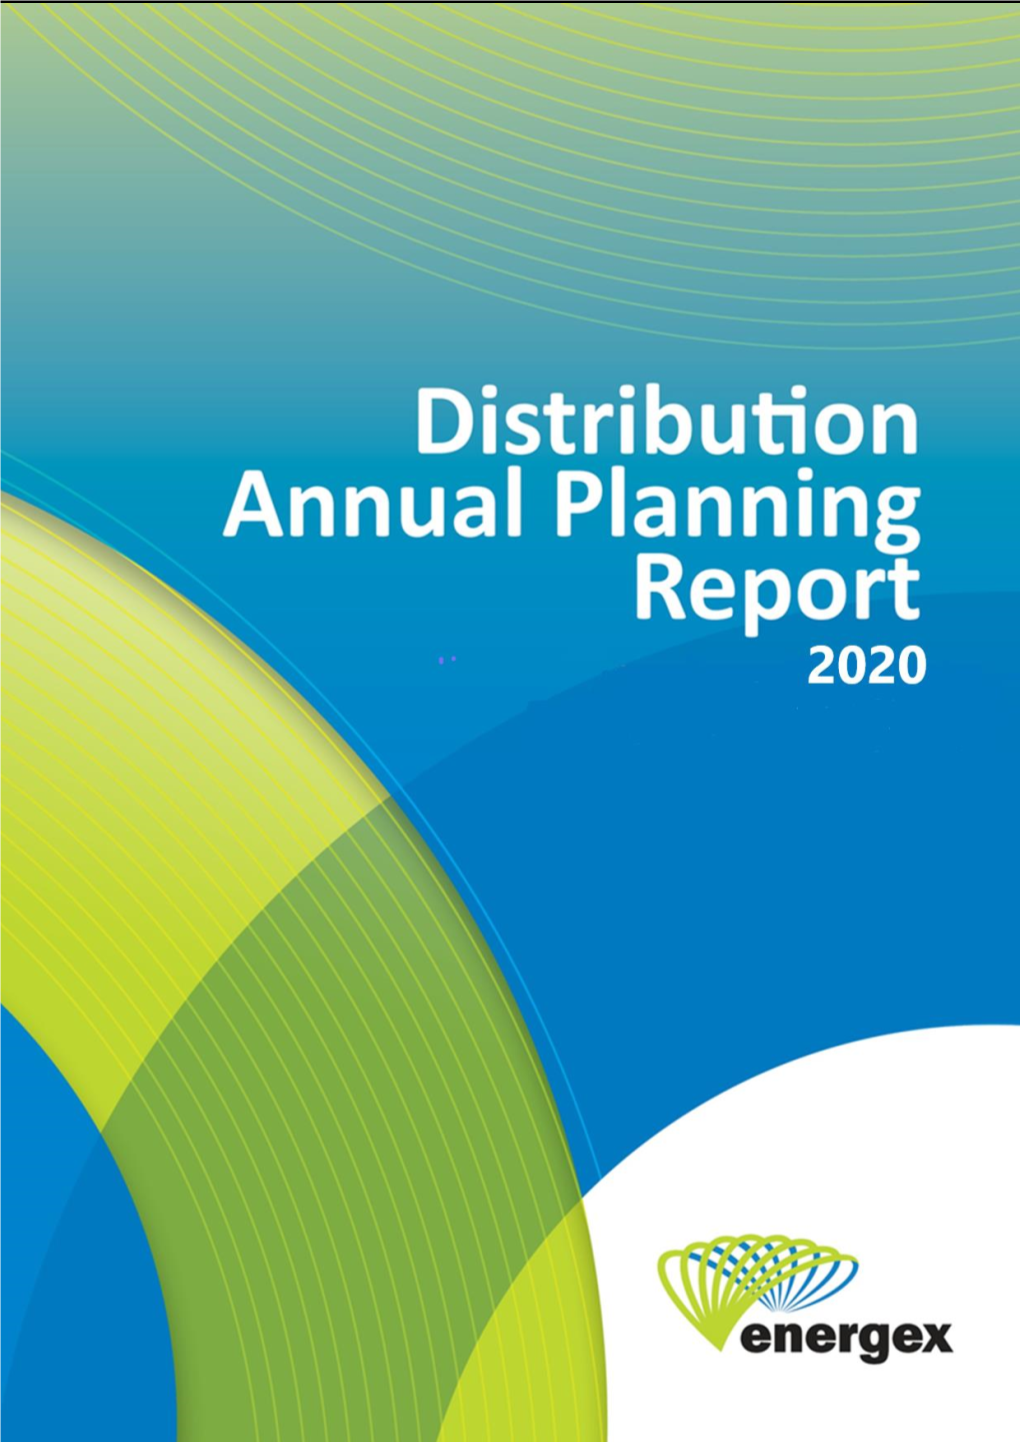 Distribution Annual Planning Report 2020